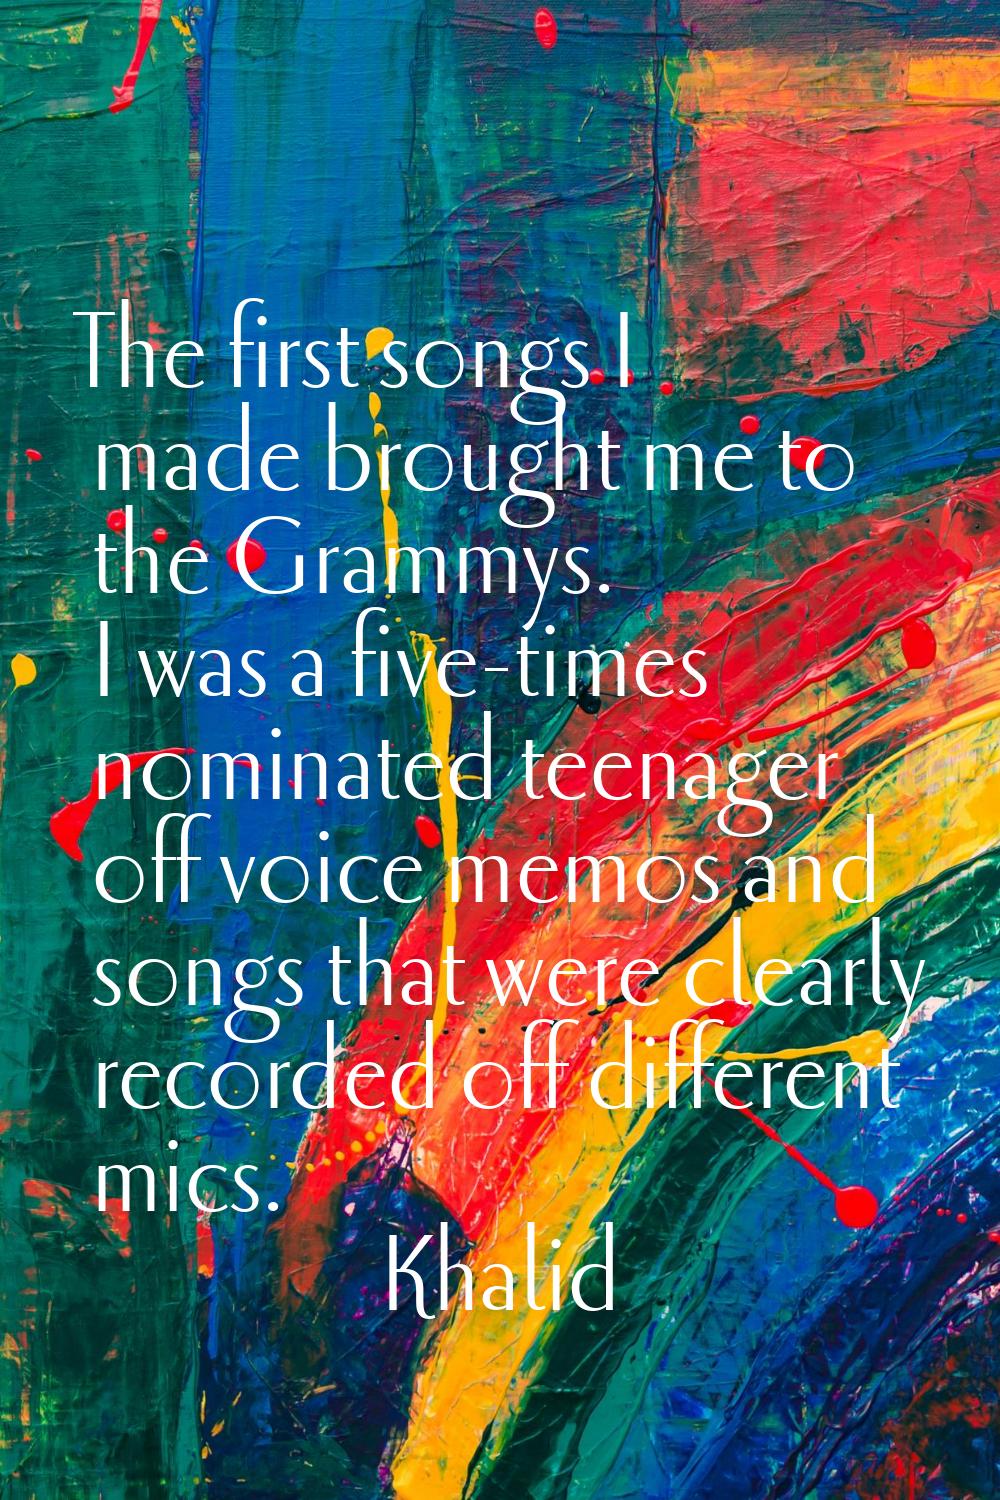 The first songs I made brought me to the Grammys. I was a five-times nominated teenager off voice m